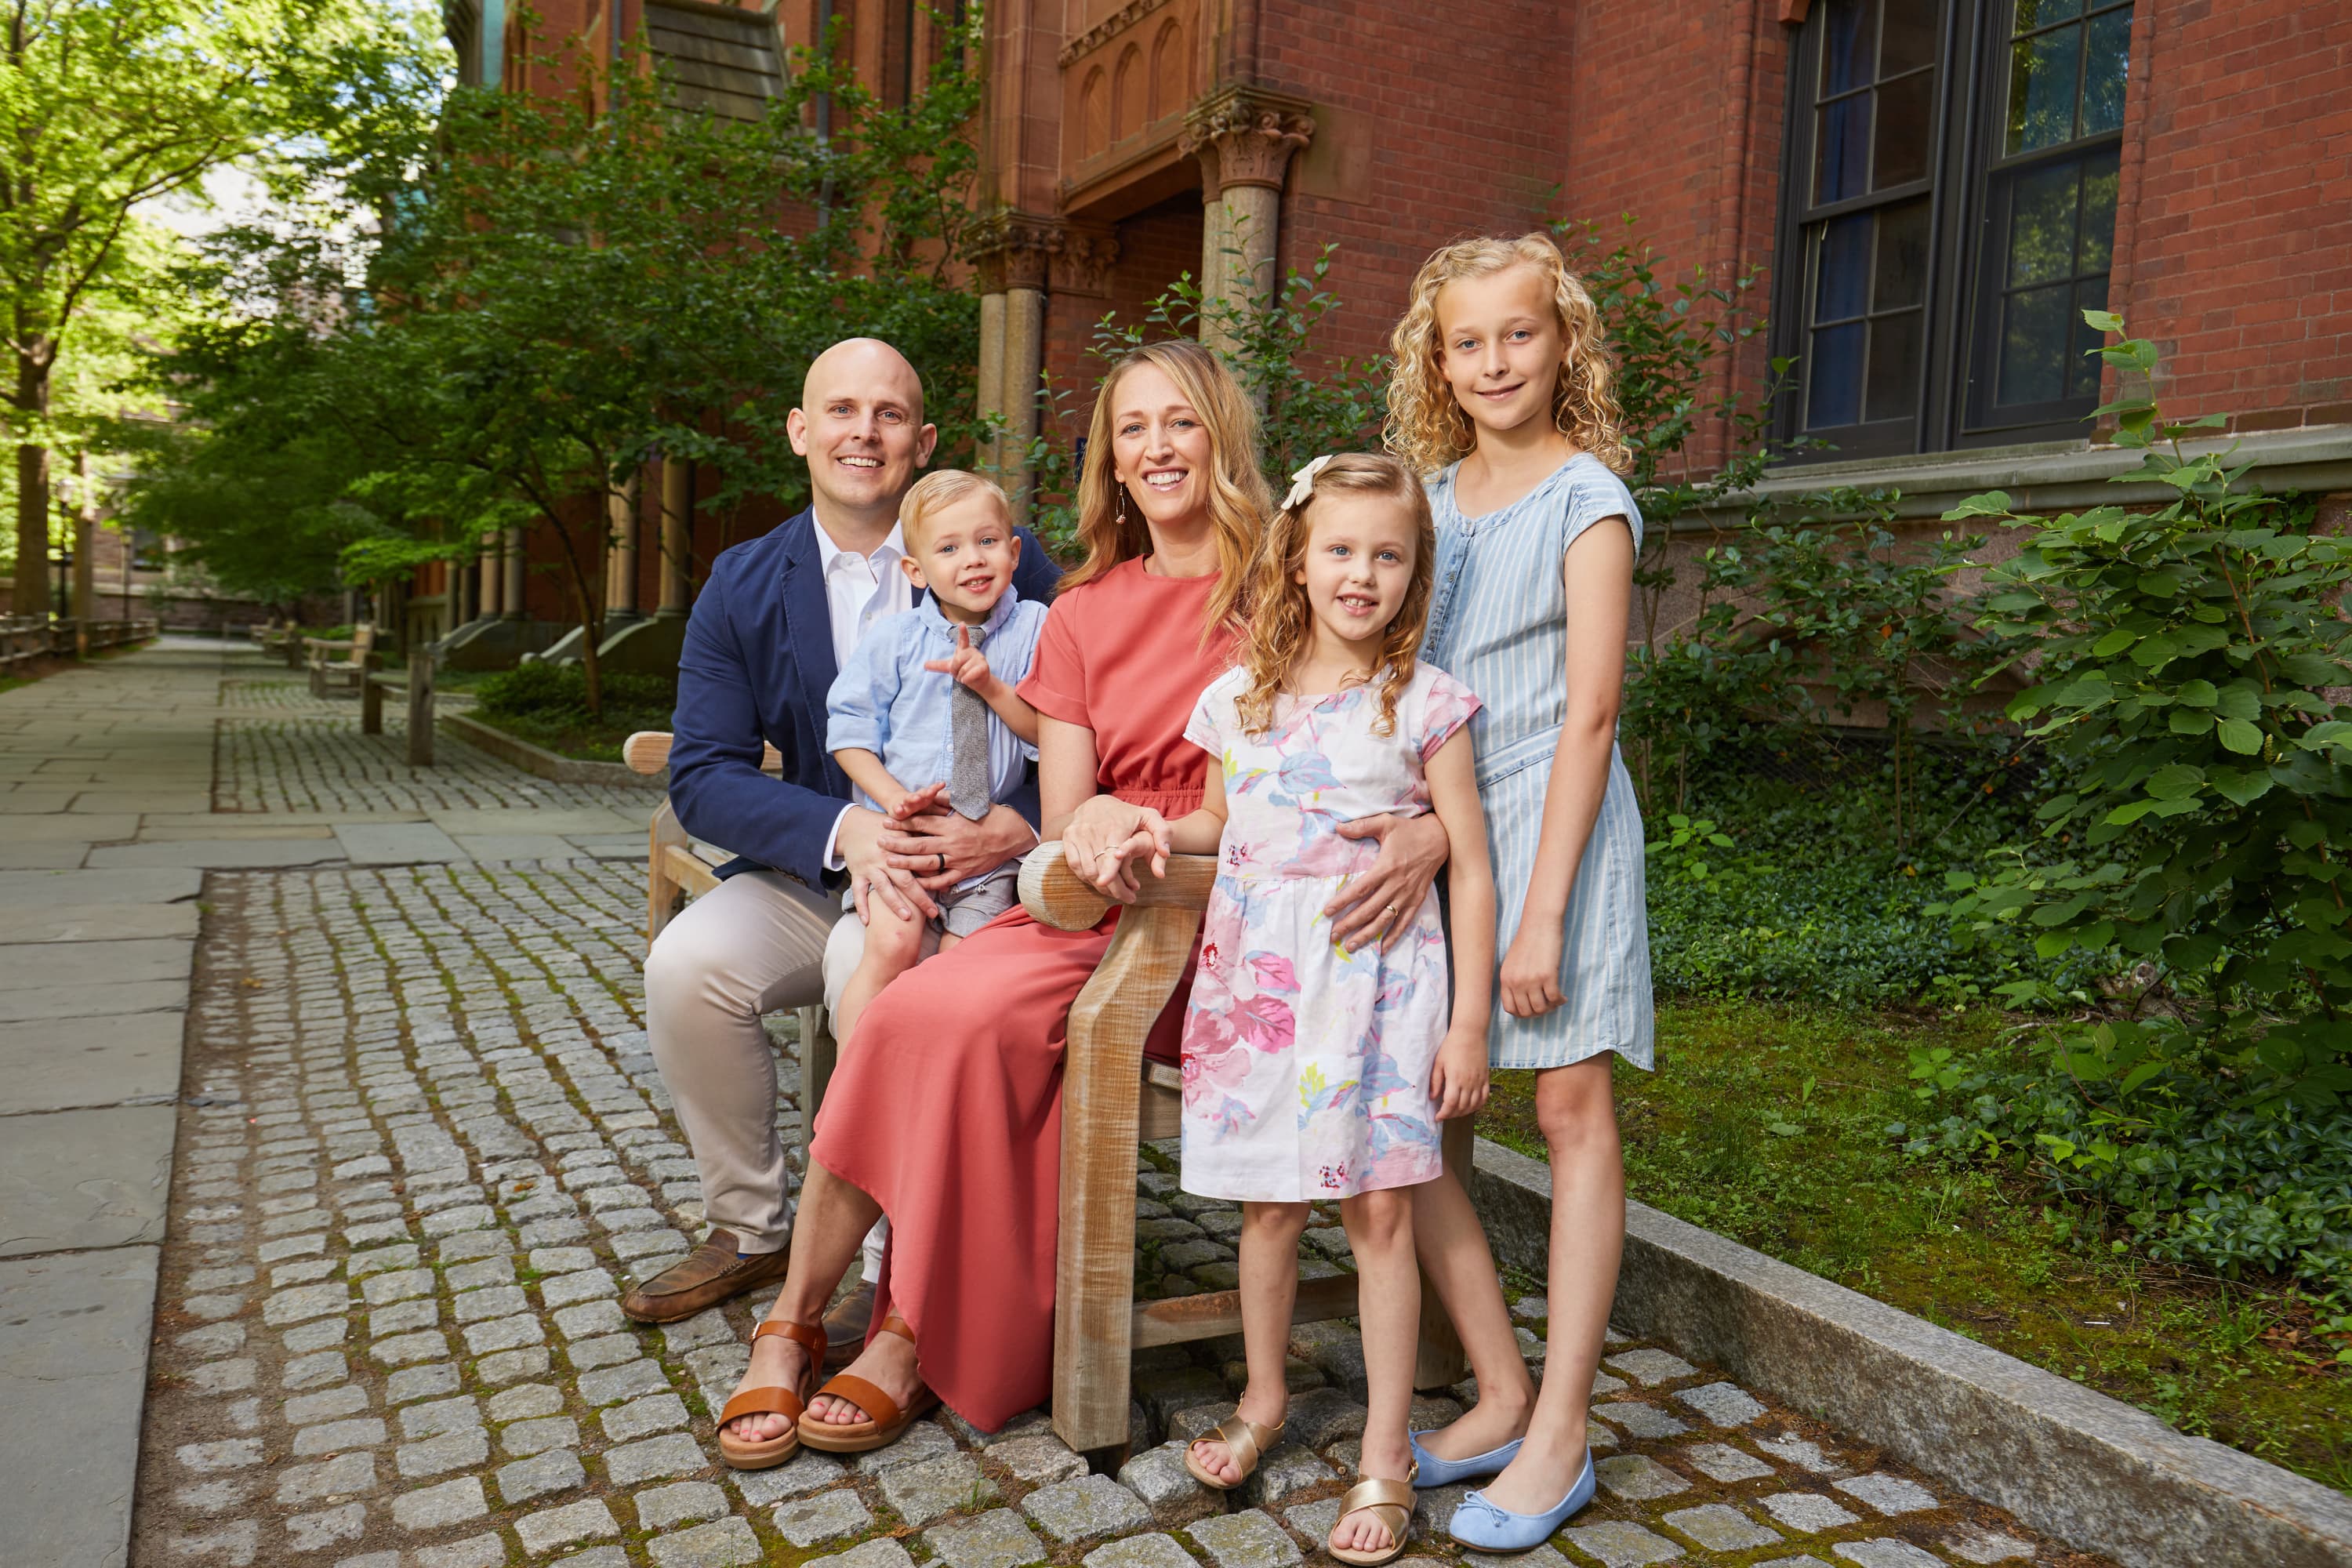 Dr. Johnson with his wife, Laurie, and their three children.